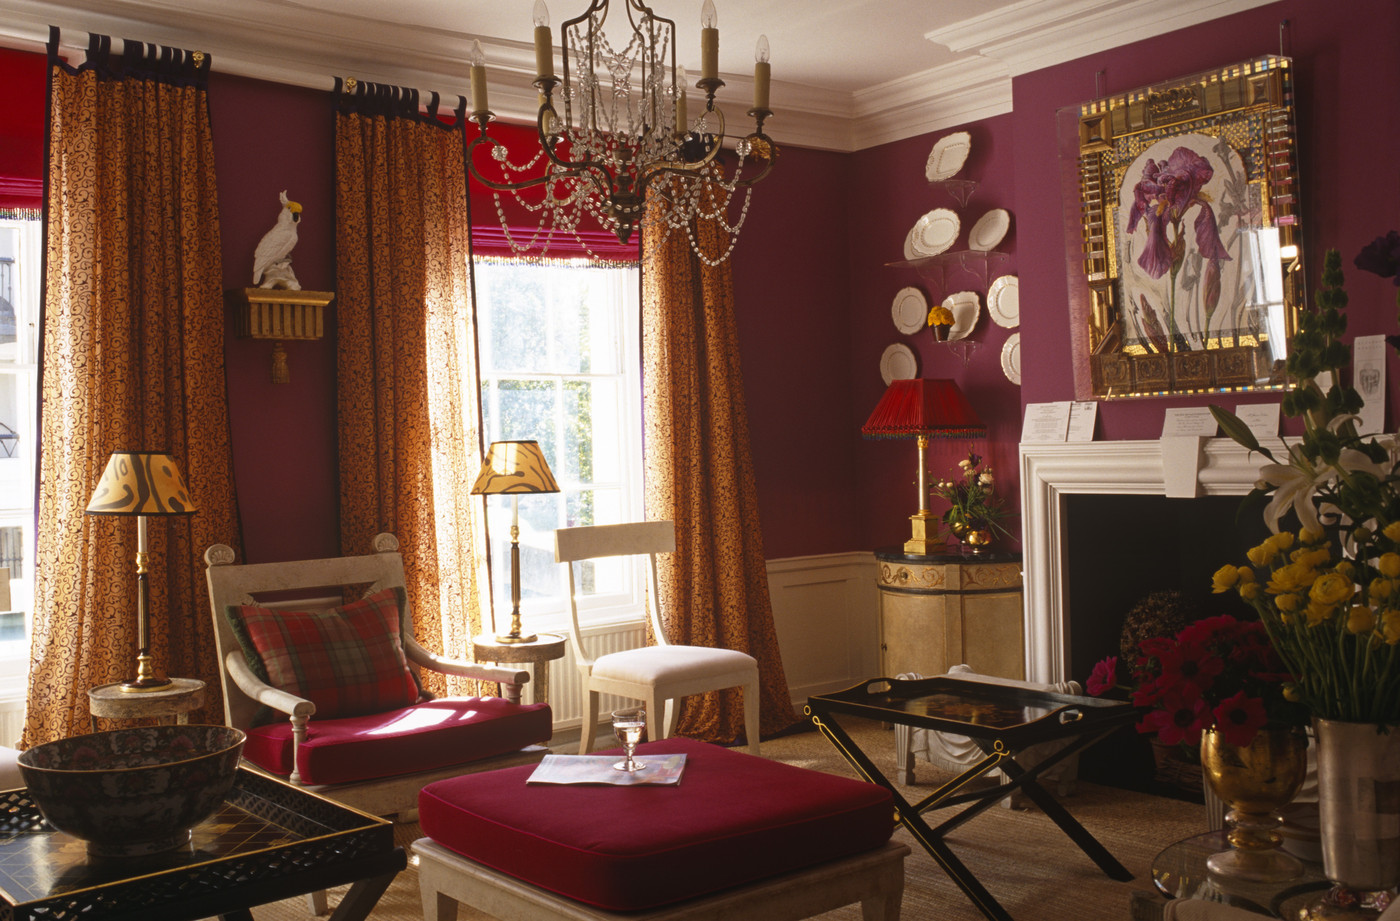 Red drawing room with a chandelier